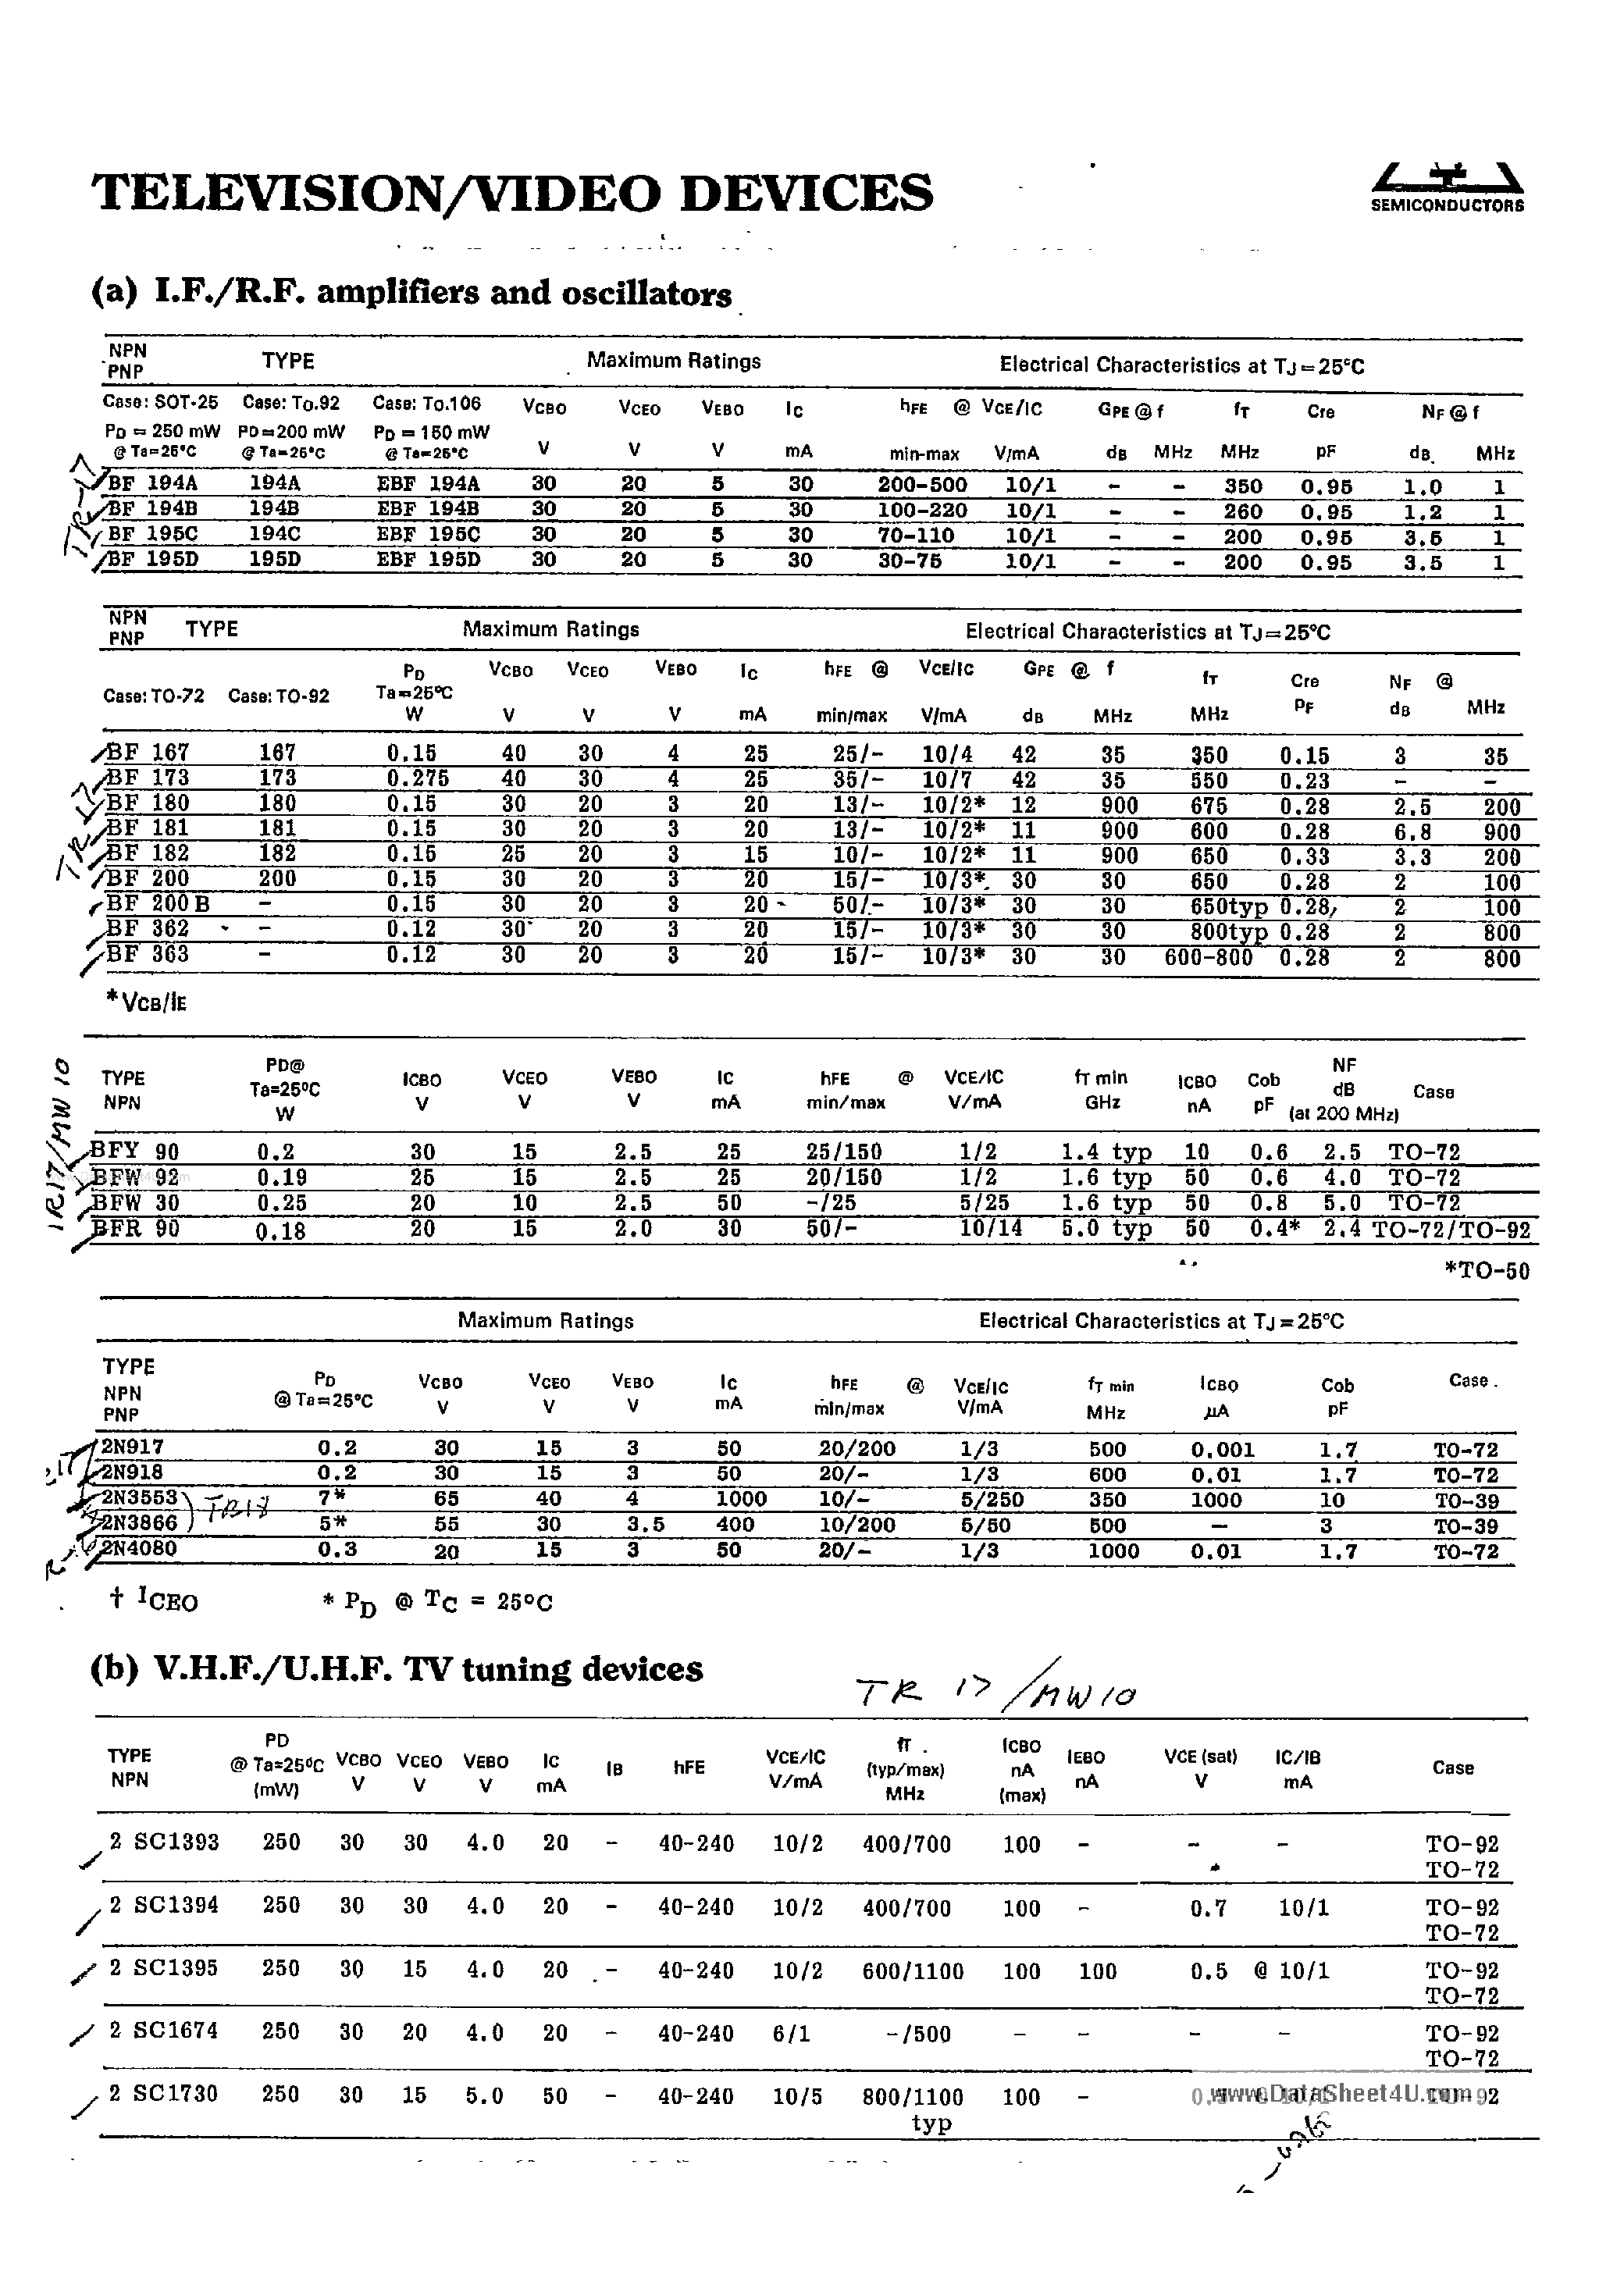 Datasheet BF167 - (BF1xx) TV / Video Devices page 1